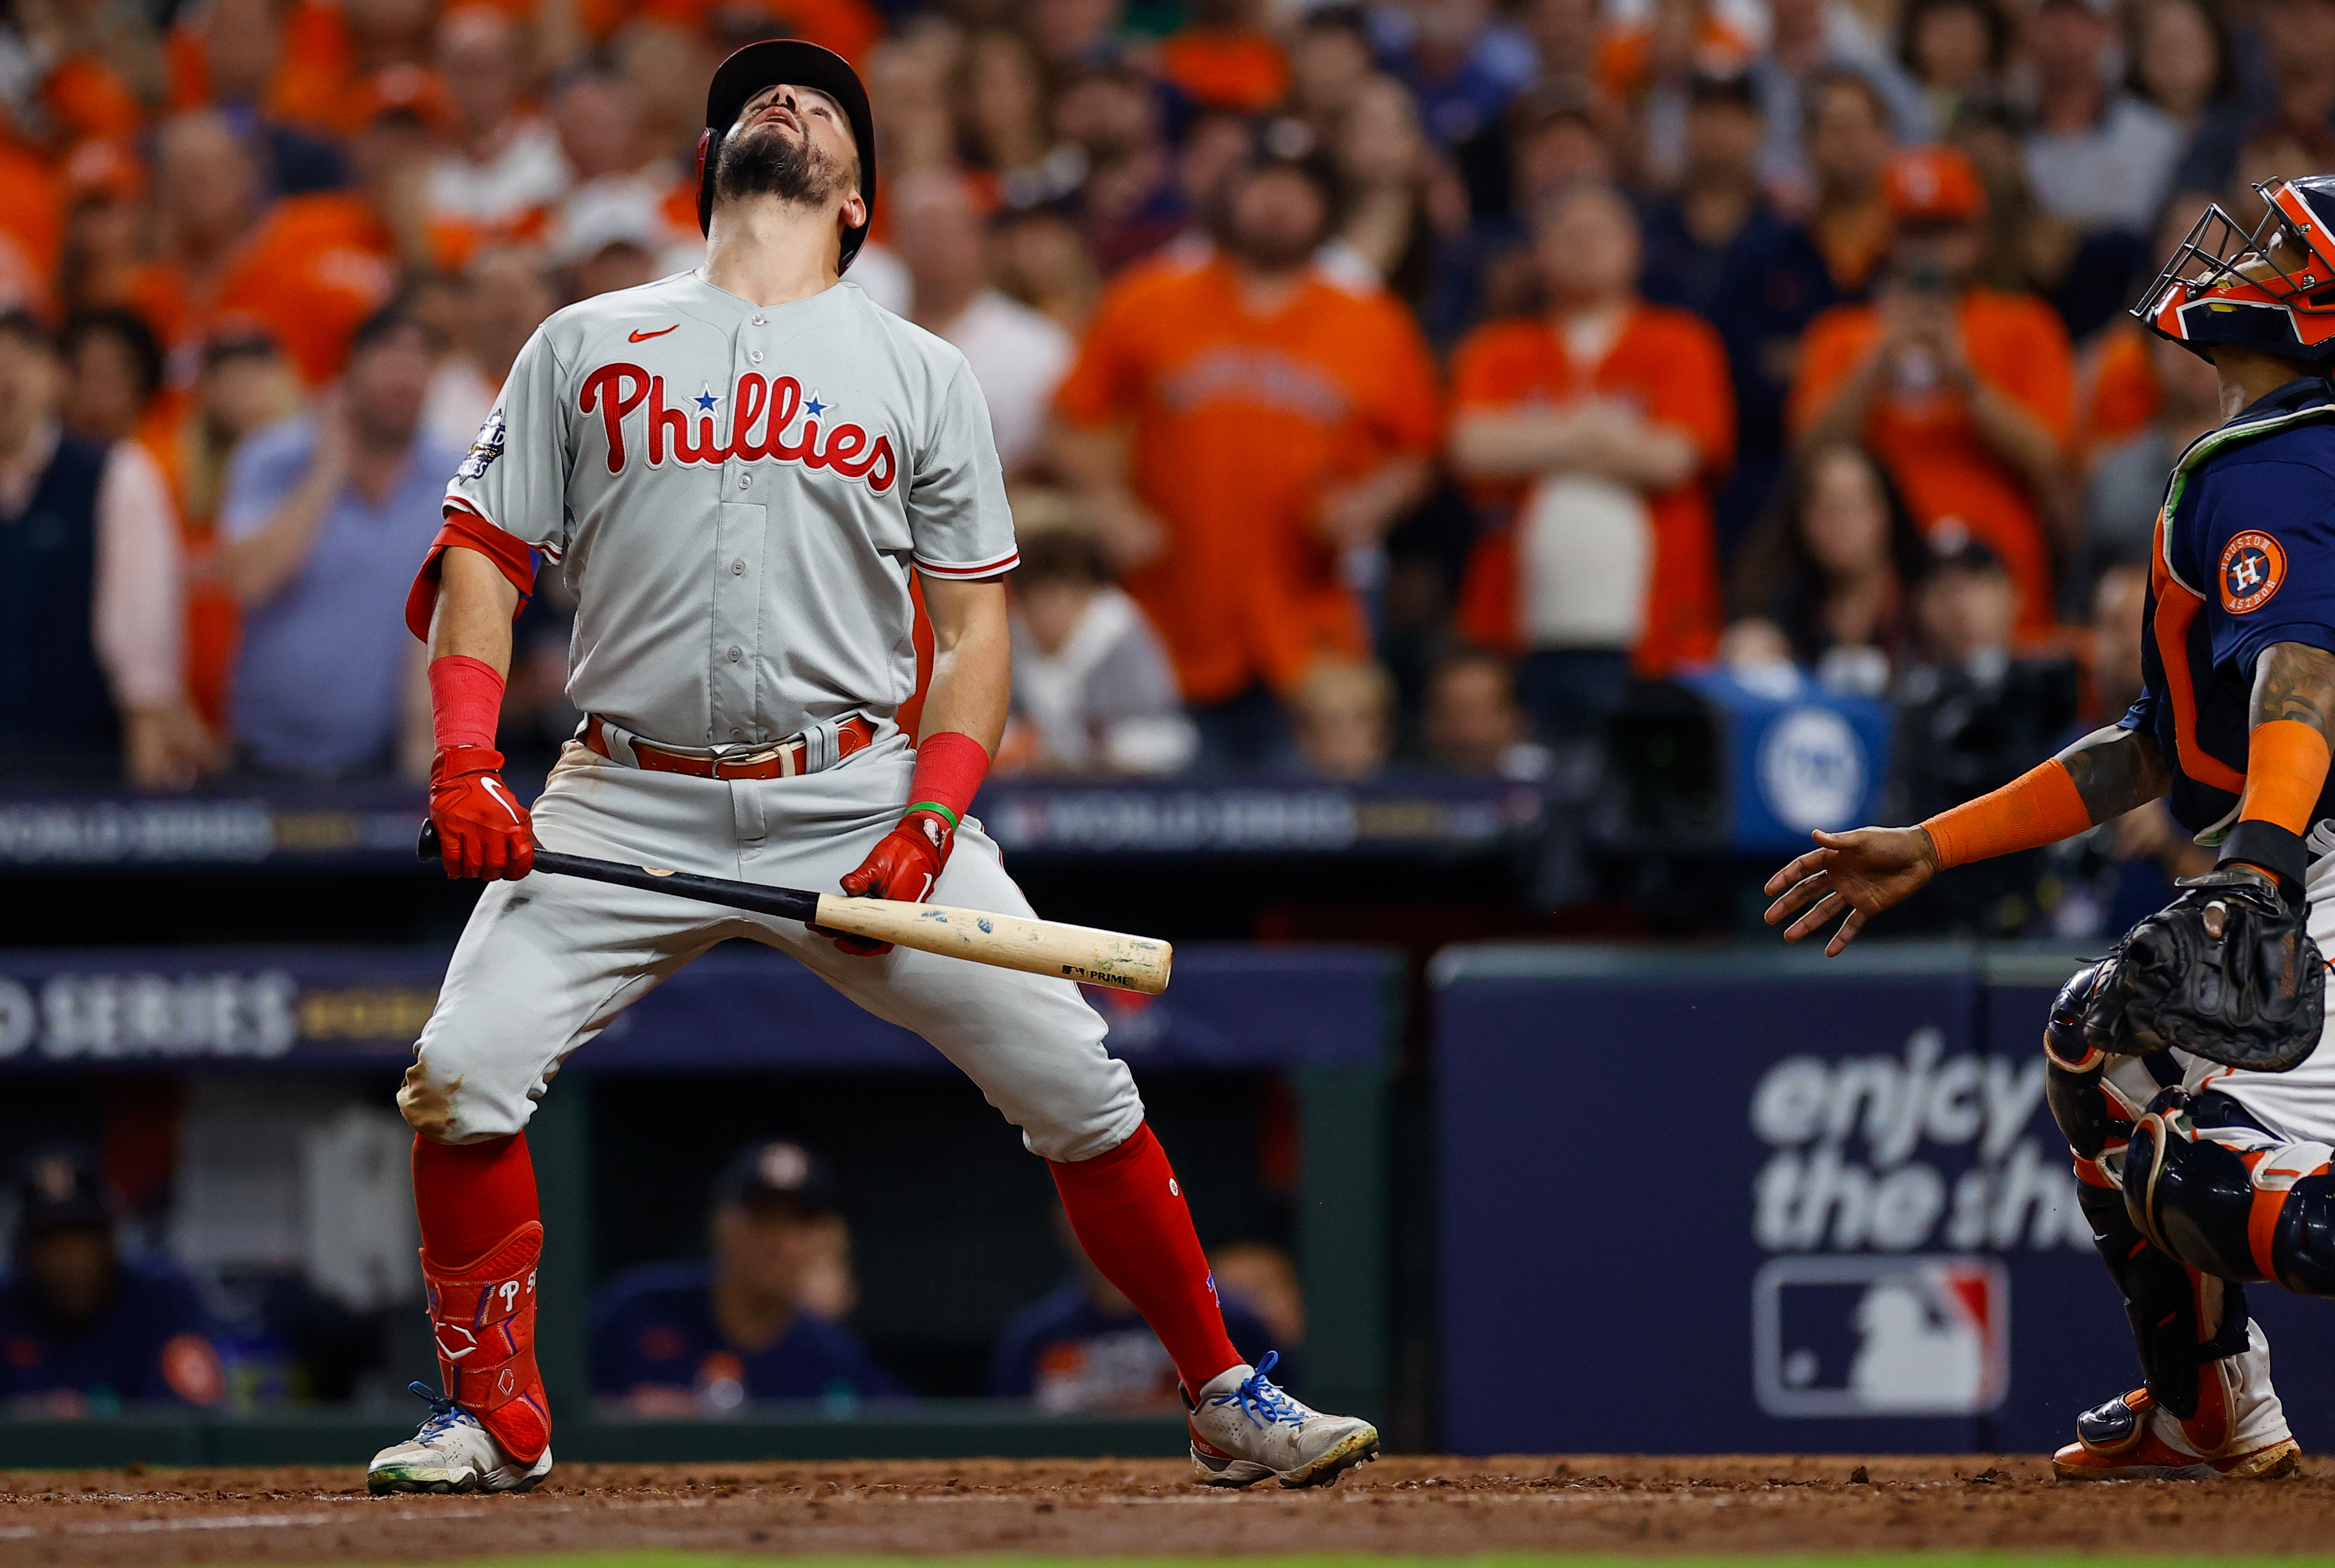 How Phillies Vs. Astros World Series Is A Rematch Of Eagles Super